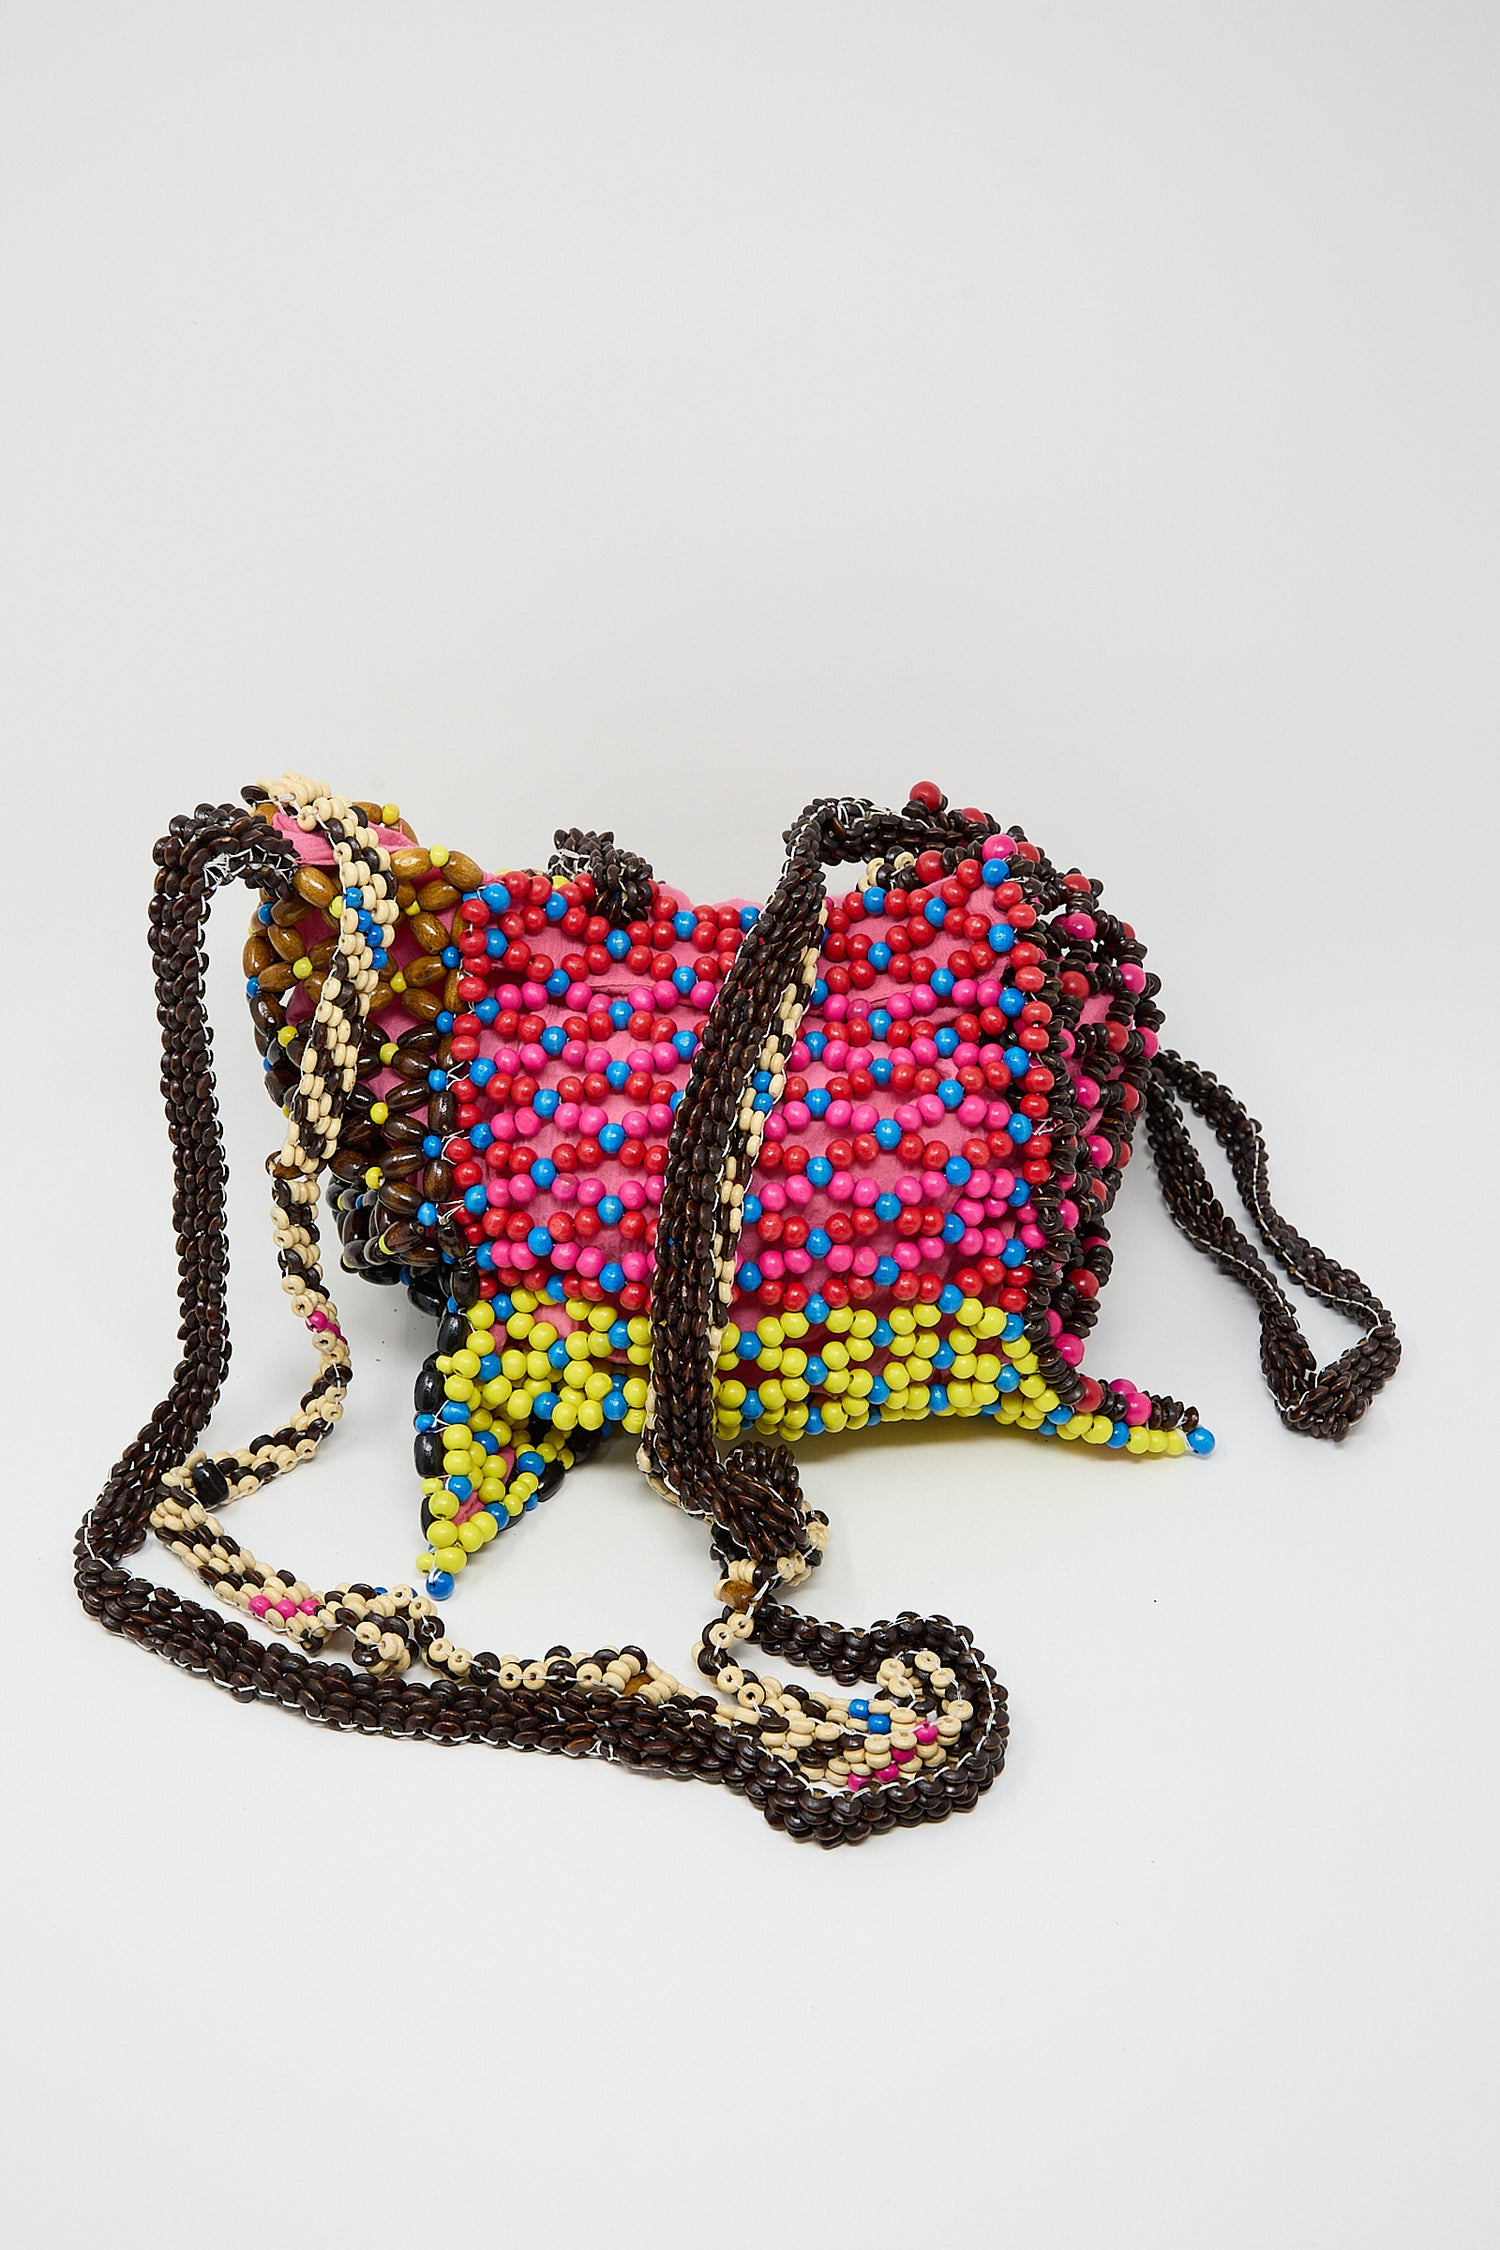 Colorful Assorted Beads Hectic Long Strap Bag in Multi Noise with a black strap against a white background by Luna Del Pinal.